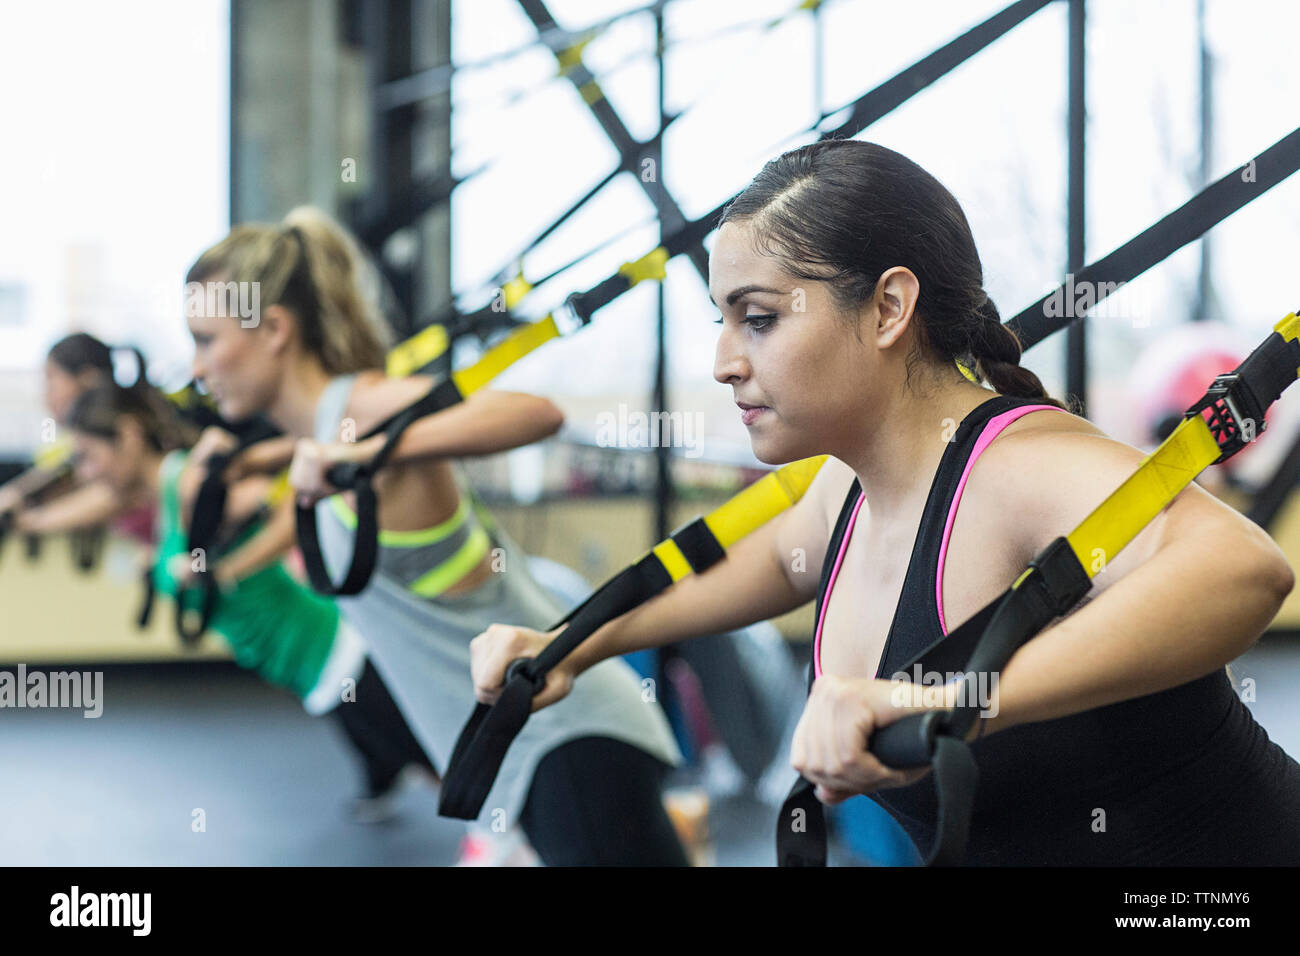 Women exercising with resistance bands in gym Stock Photo